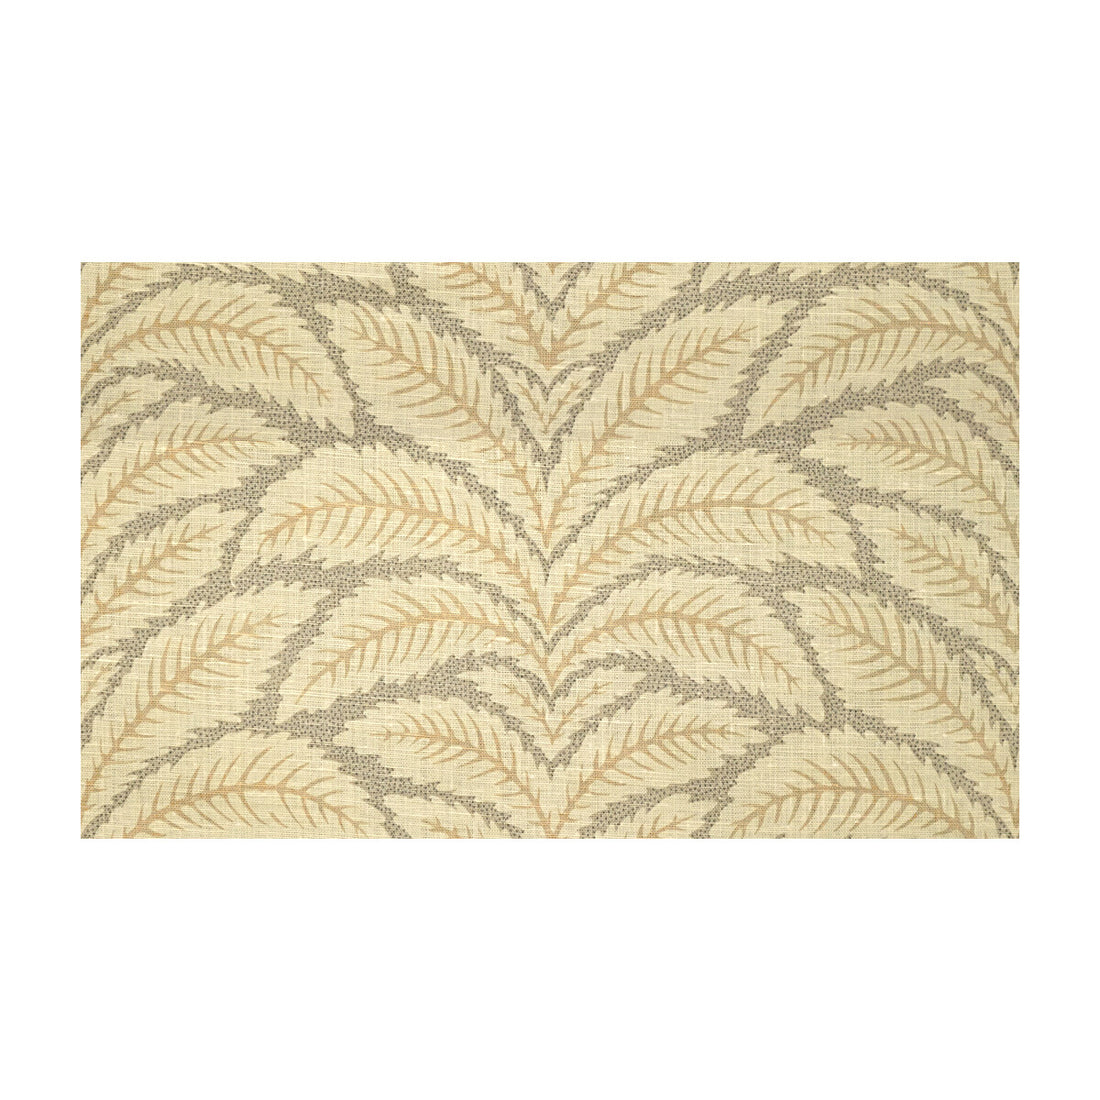 Talavera Linen fabric in birch color - pattern 8014104.11.0 - by Brunschwig &amp; Fils in the Maisonnette collection